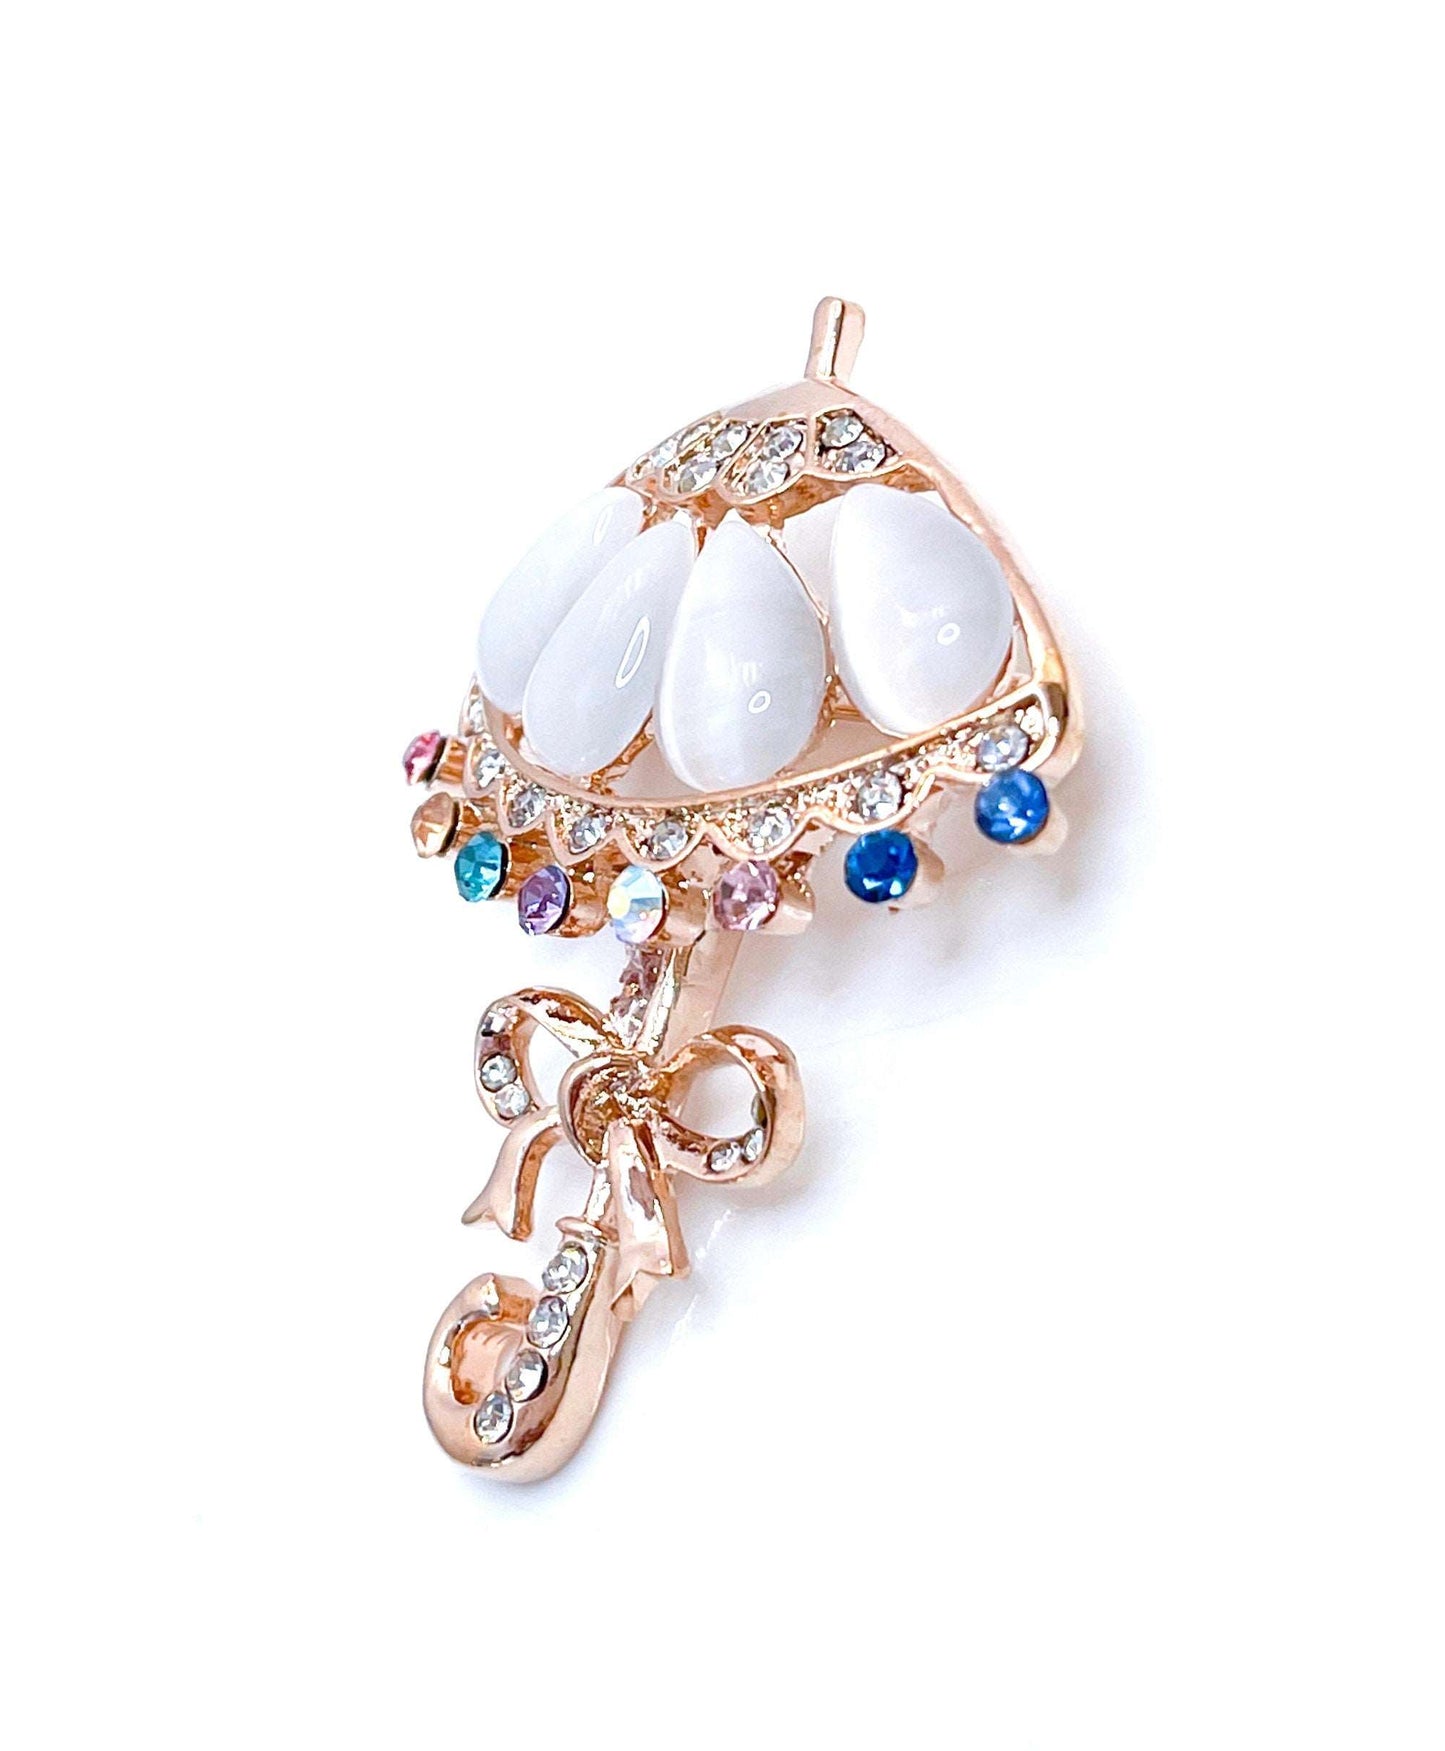 Beautiful Faux Opal Umbrella Brooch, Fun Crystal Brolly Pin, Vintage Style Summer Brolly, Brooches For Women